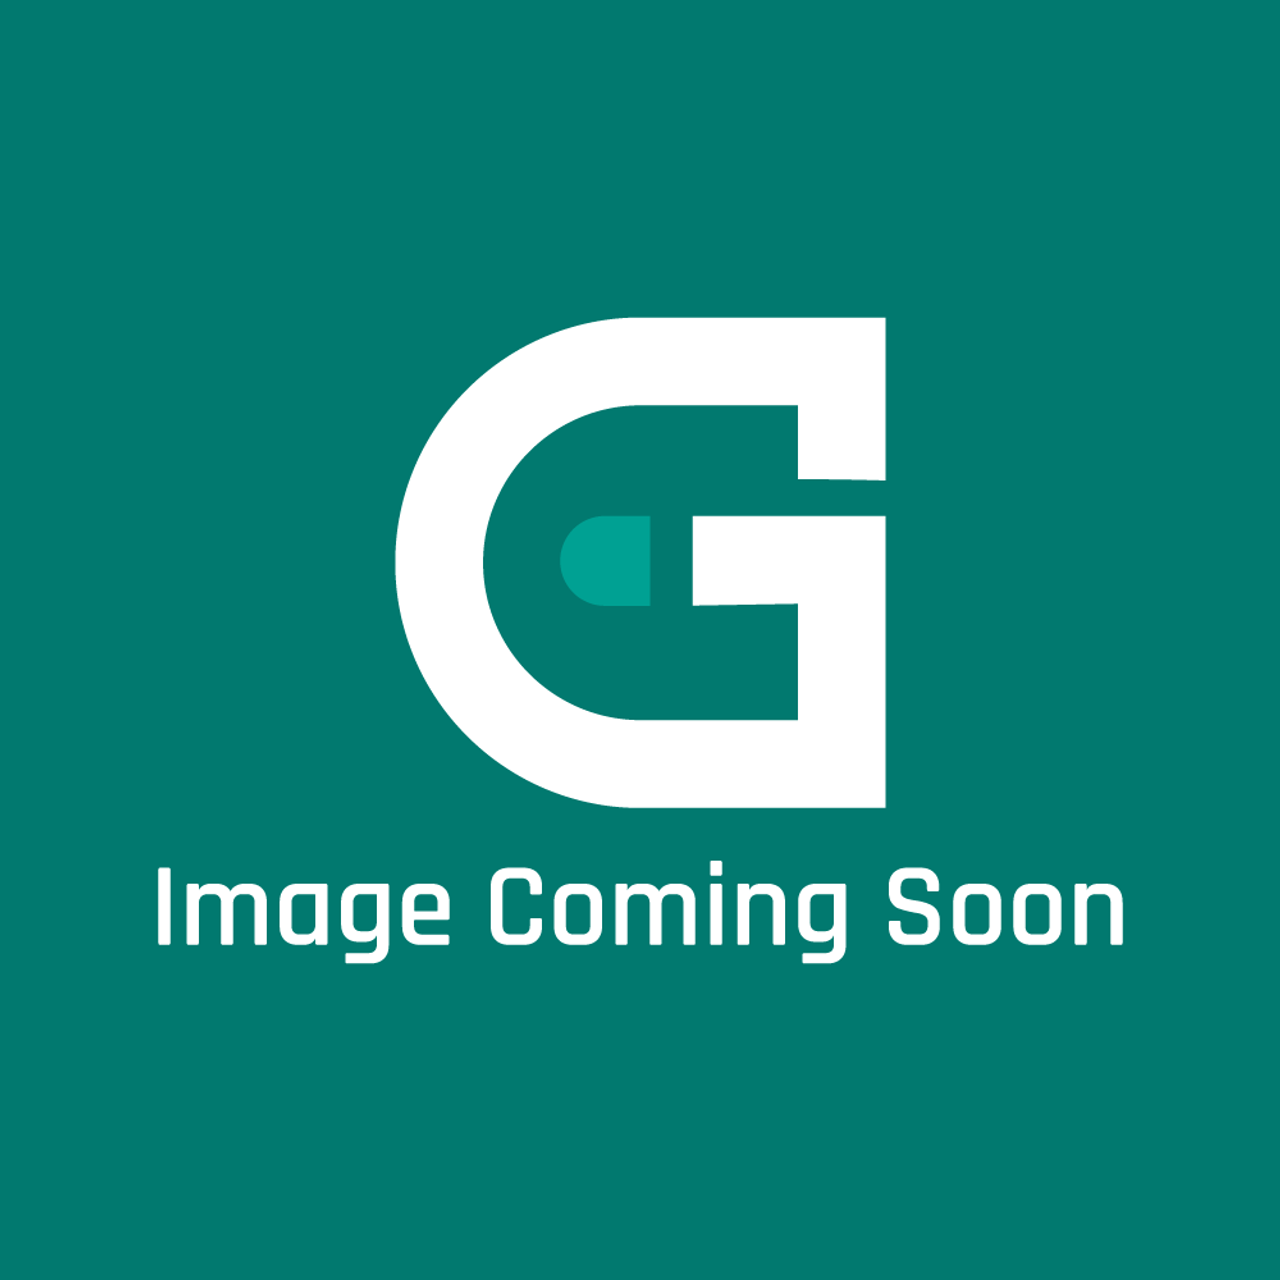 Frigidaire - Electrolux 316534200 - Glide-Low Broil - Image Coming Soon!